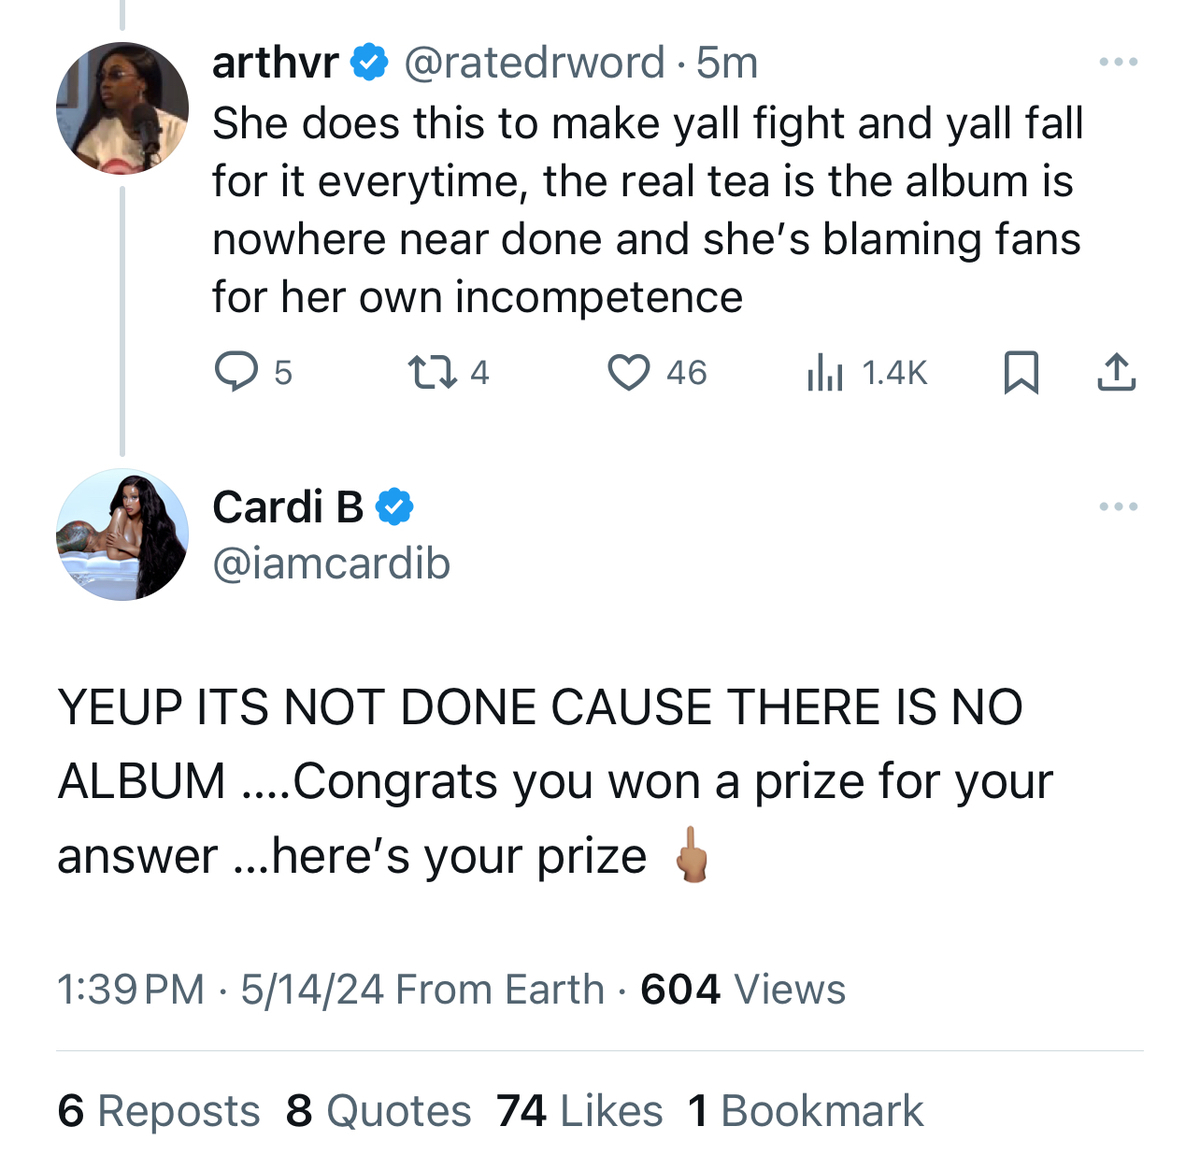 Screenshots of tweets from Cardi B responding to a critique about her album progress